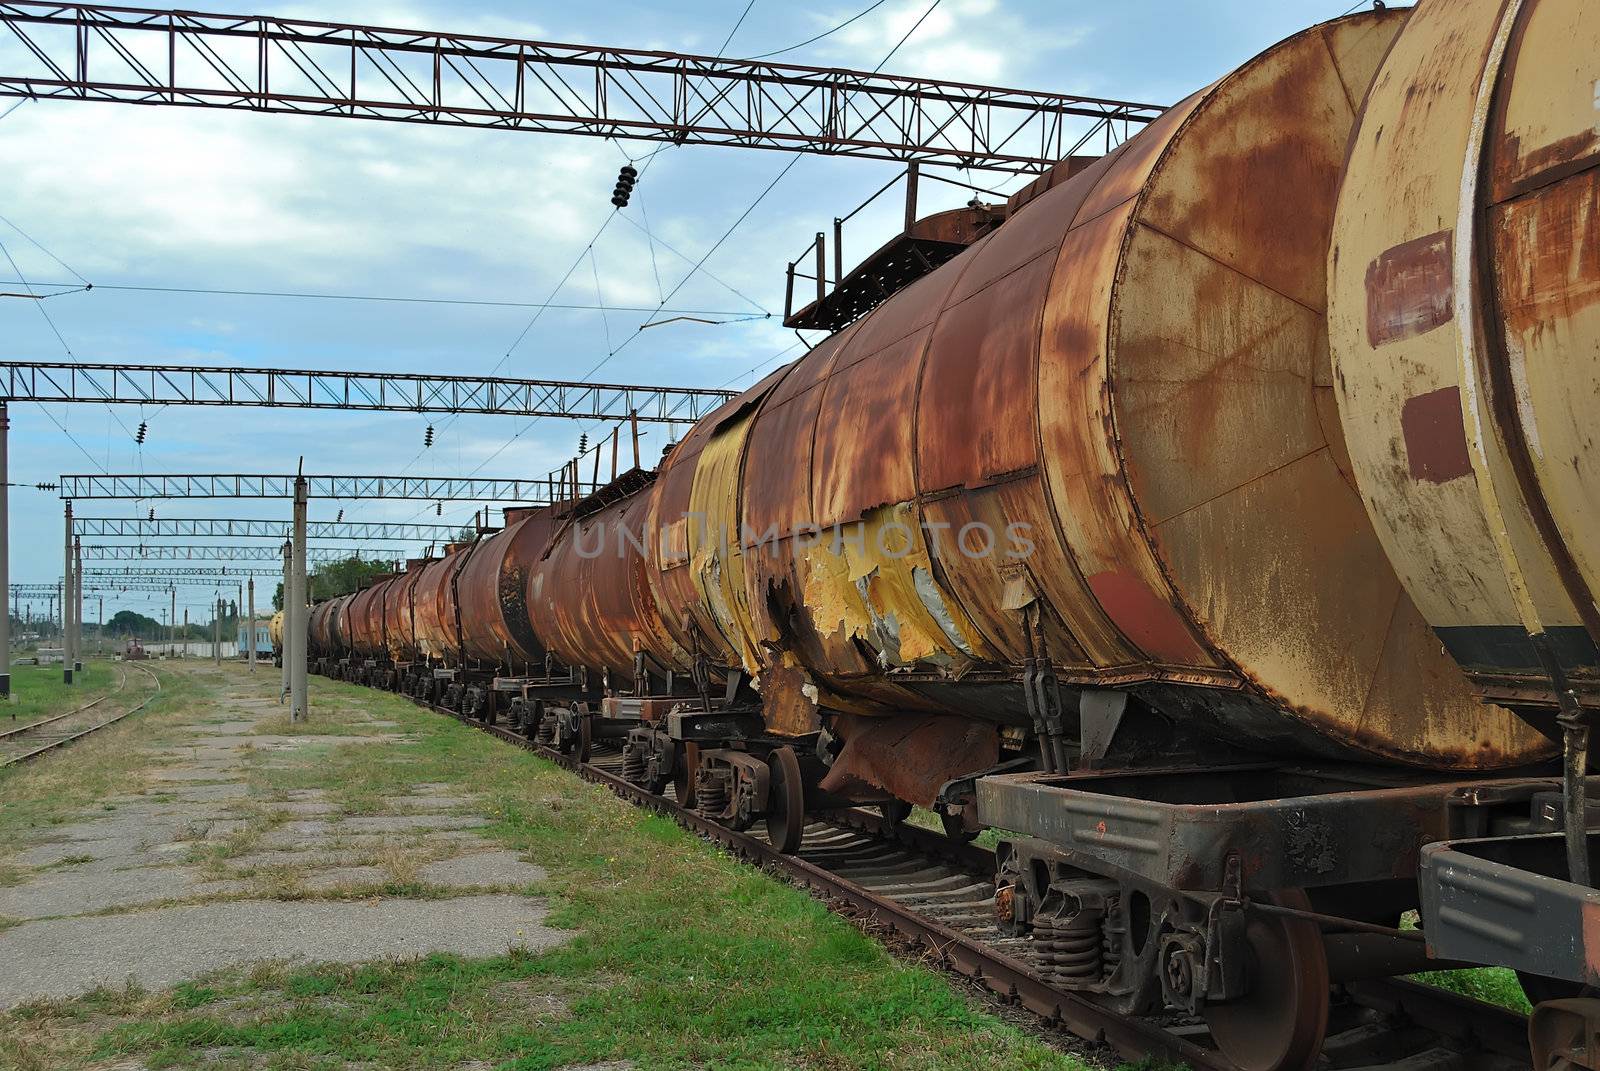 the train transports old tanks with oil and fuel